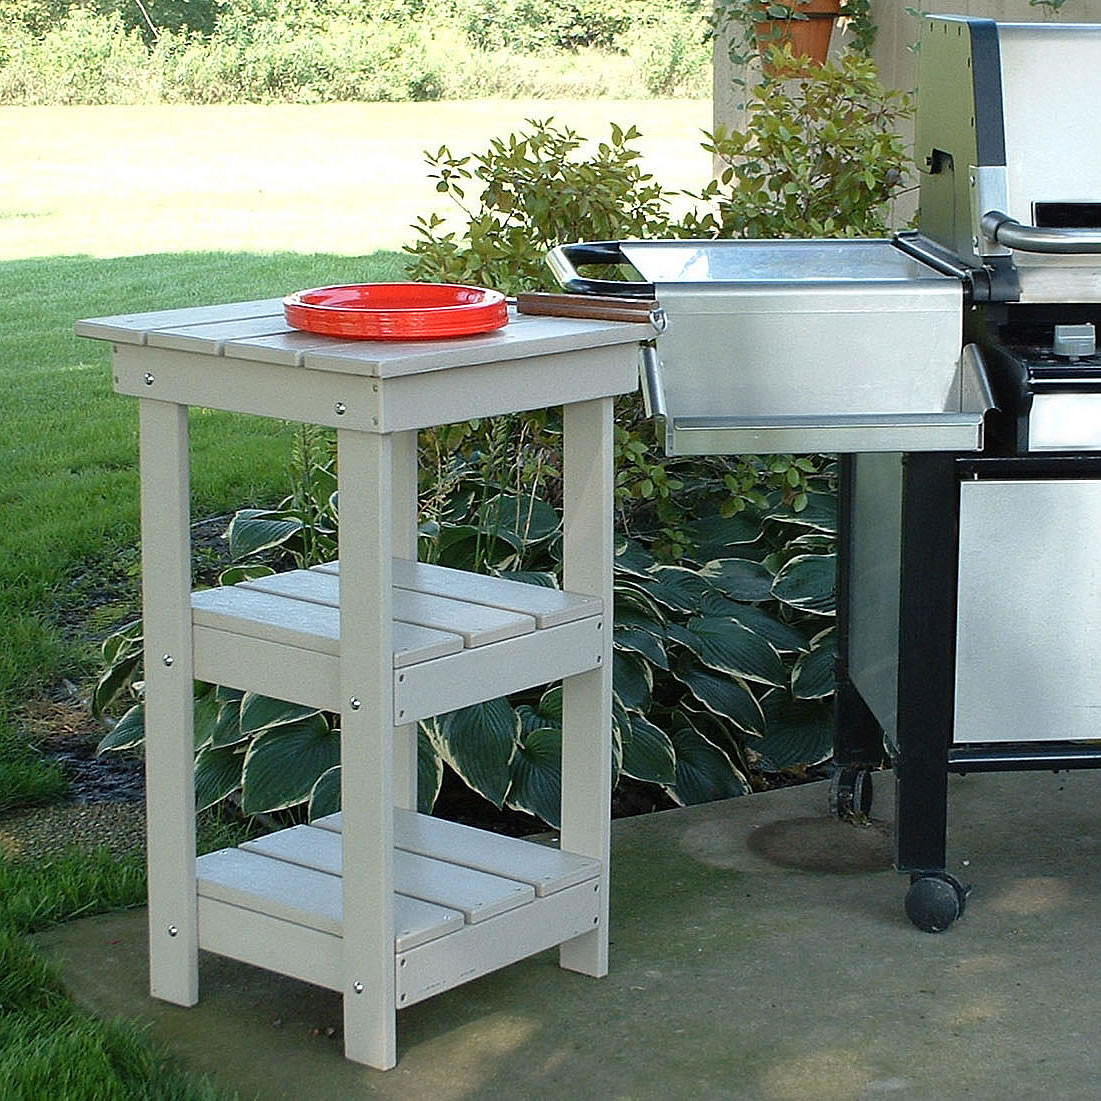 https://www.poly-lumber-furniture.com/media/catalog/product/p/o/poly-lumber-grill-table-gt206.jpg